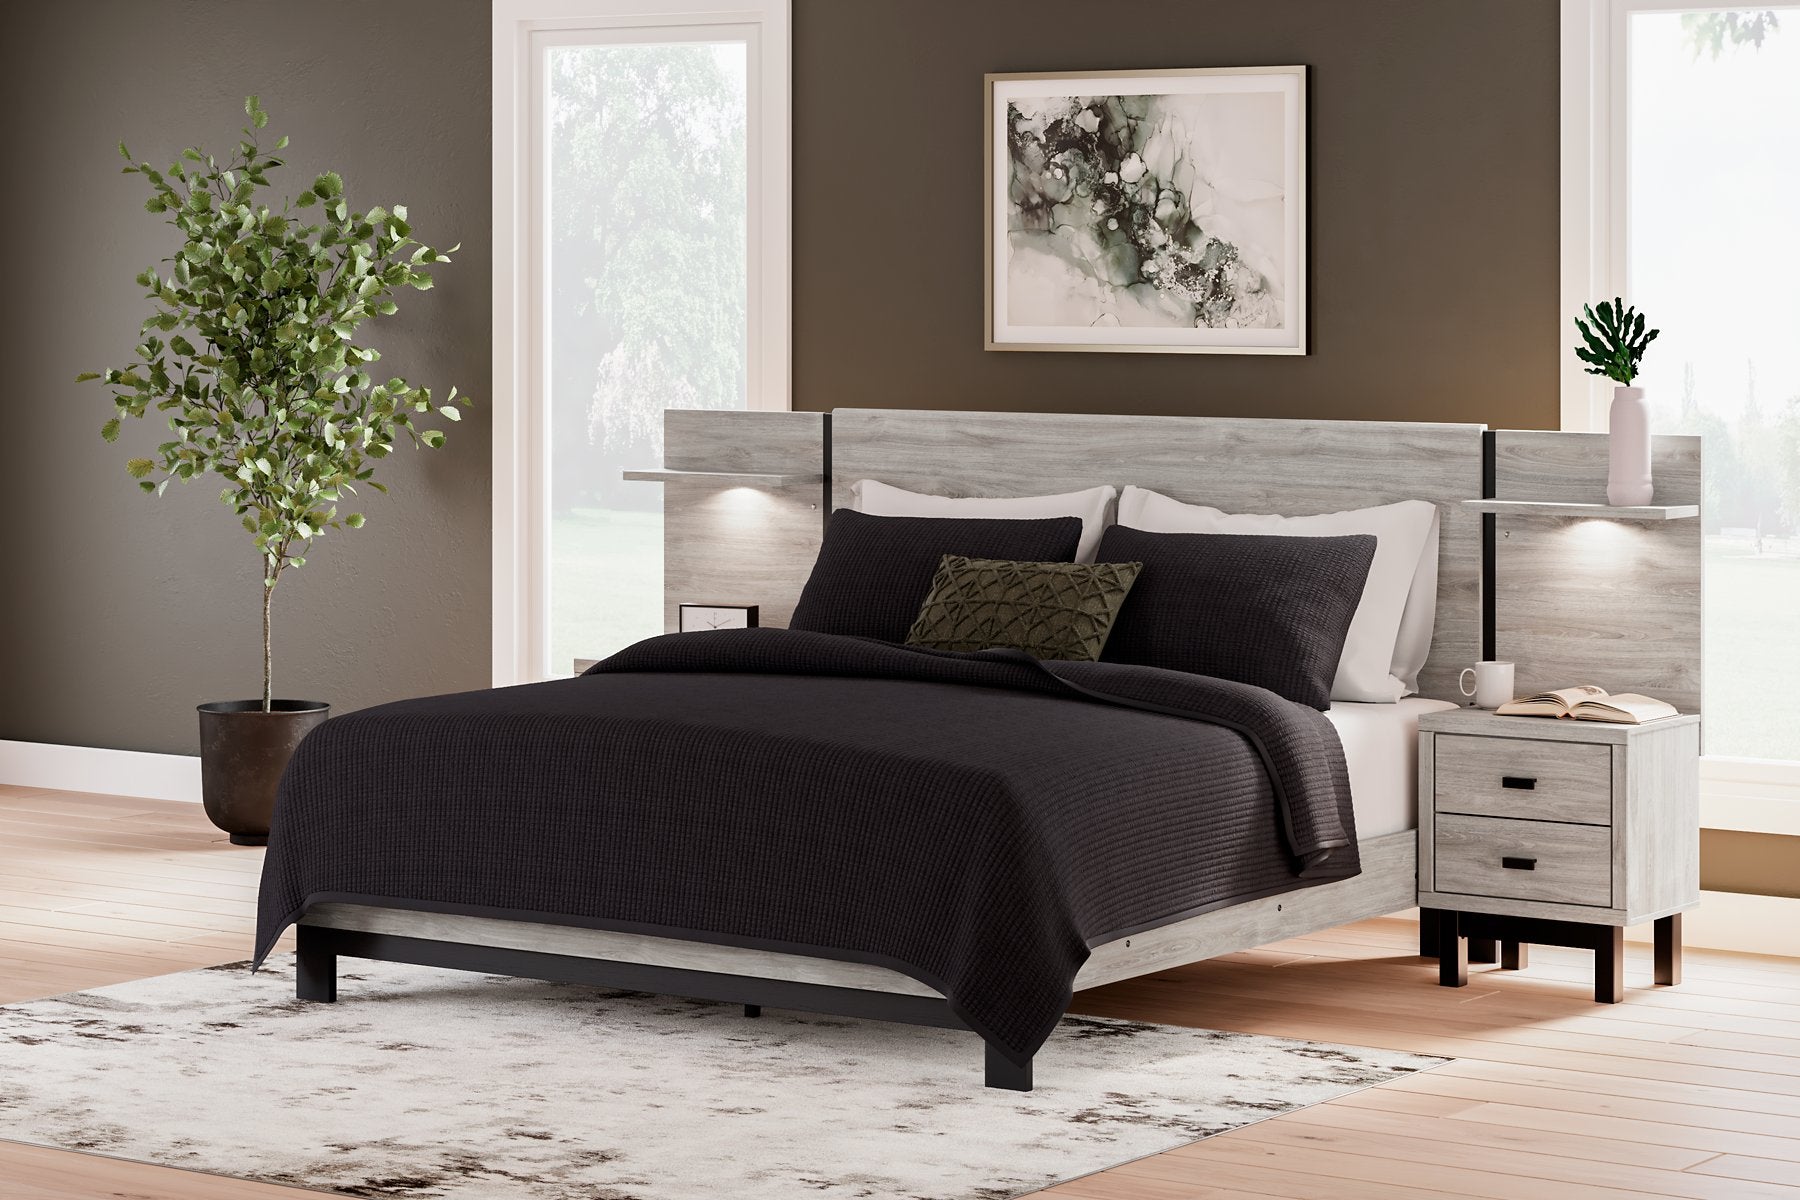 Vessalli Bed with Extensions - Half Price Furniture